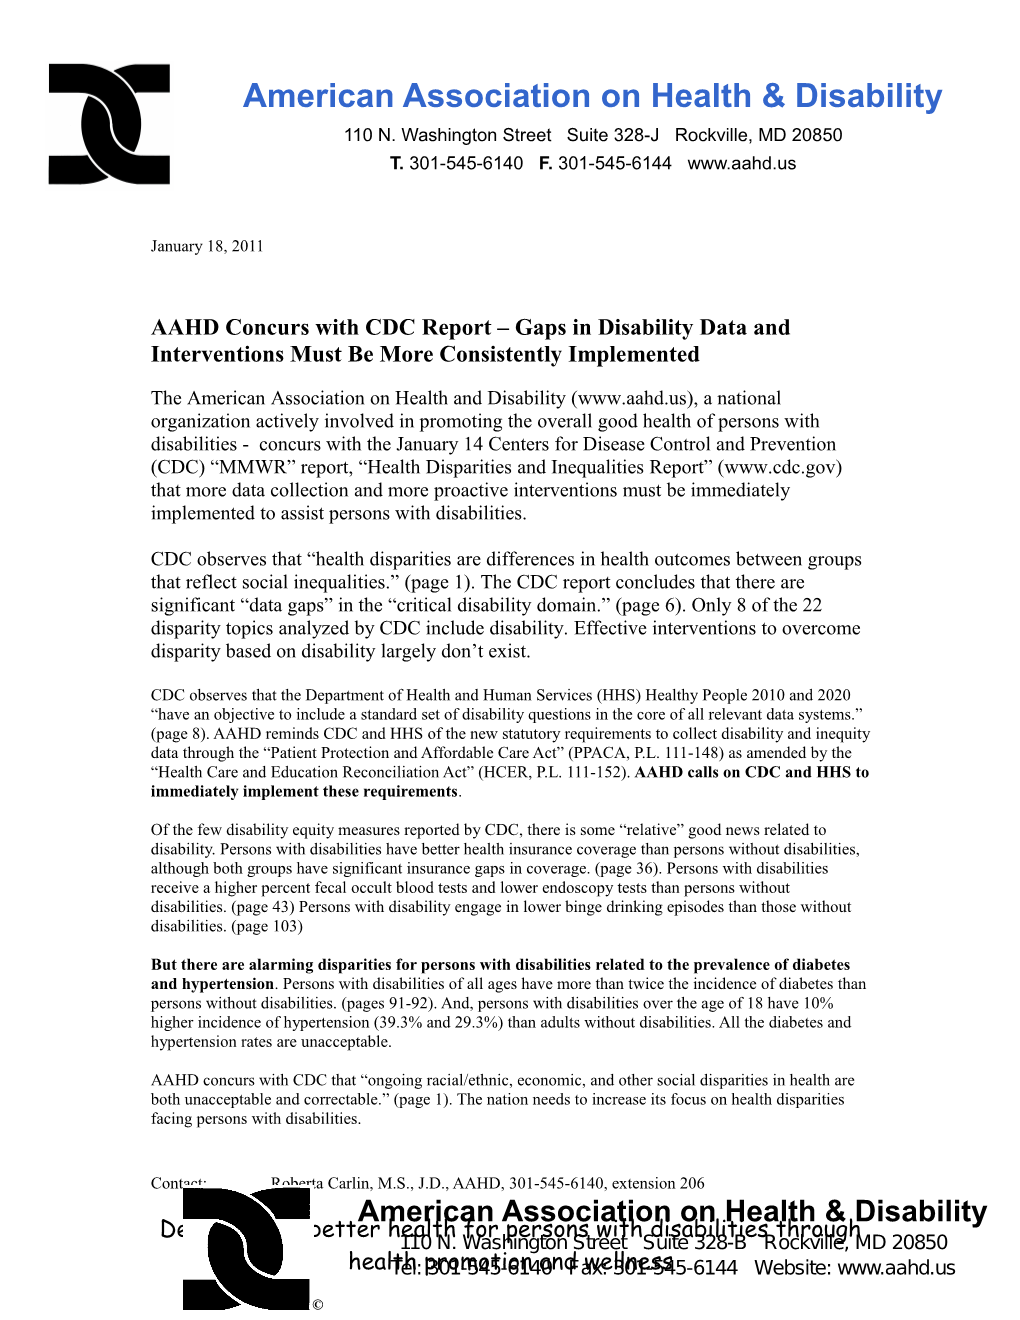 AAHD Concurs with CDC Report Gaps in Disability Data and Interventions Must Be More